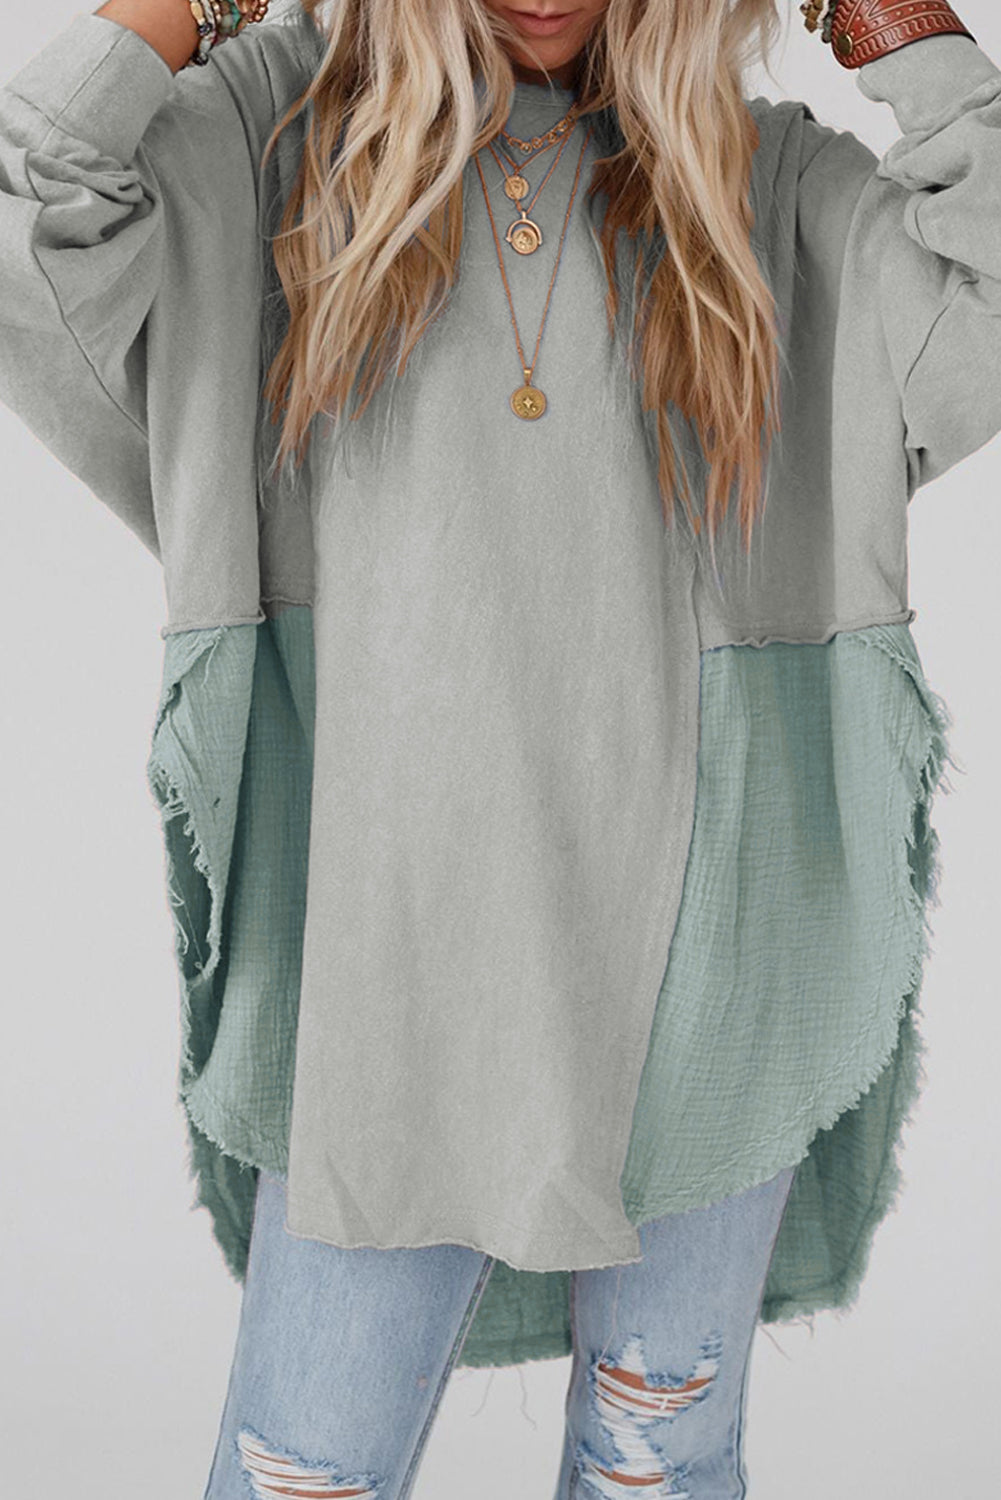 Gray Raw Edge Leopard Patchwork Oversized Blouse